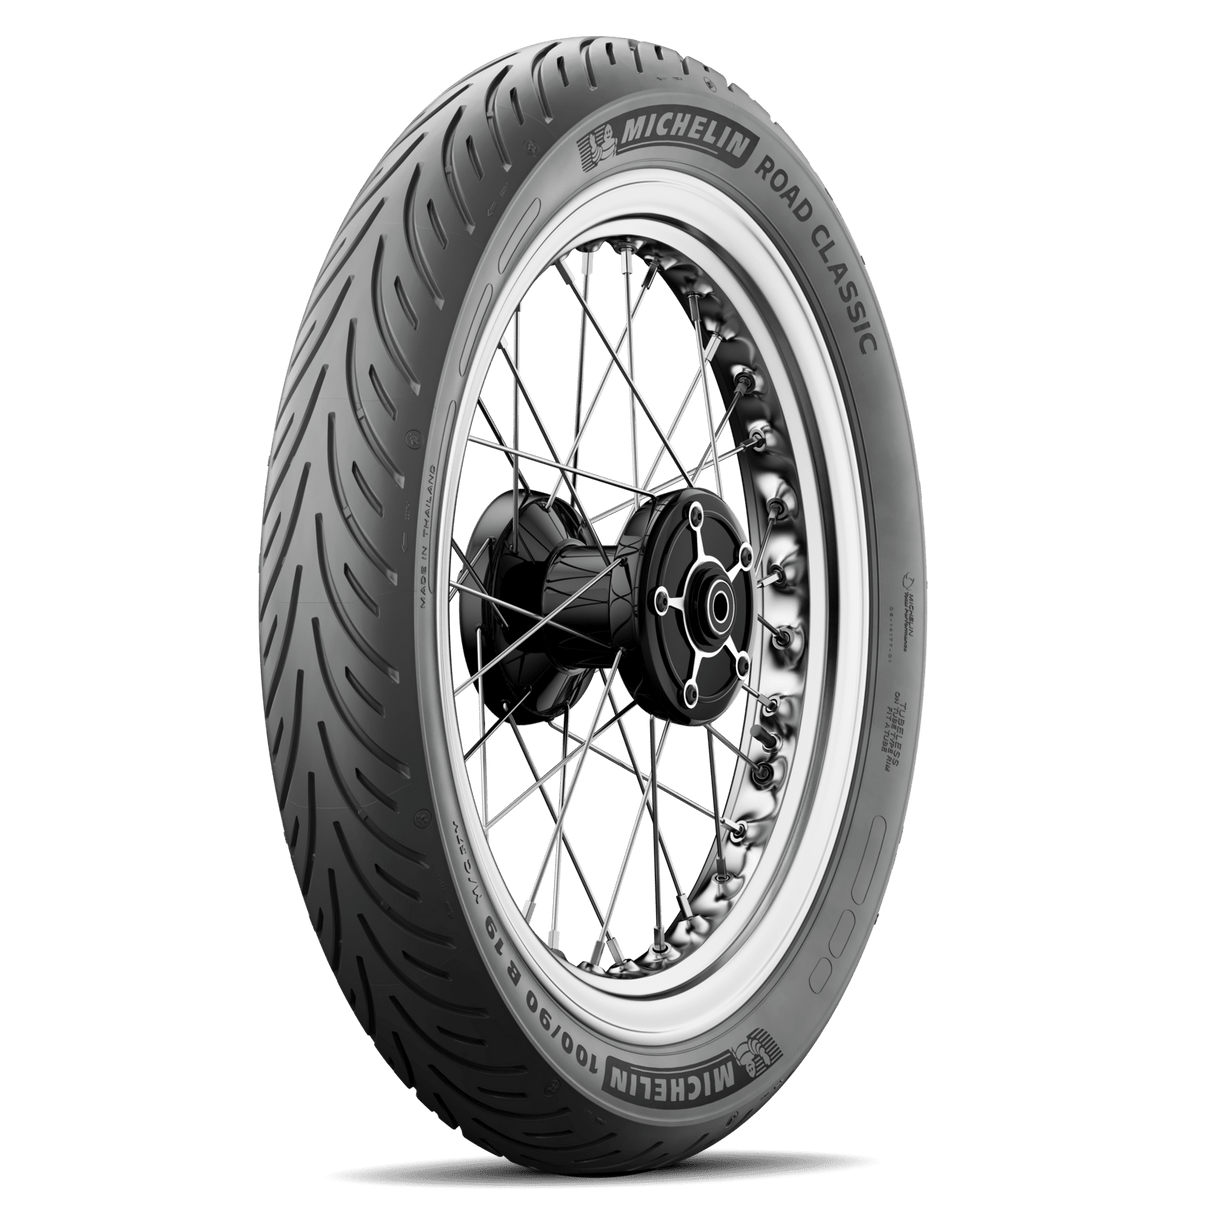 Michelin Road Classic 90/90-18 51H TL Front Tyre